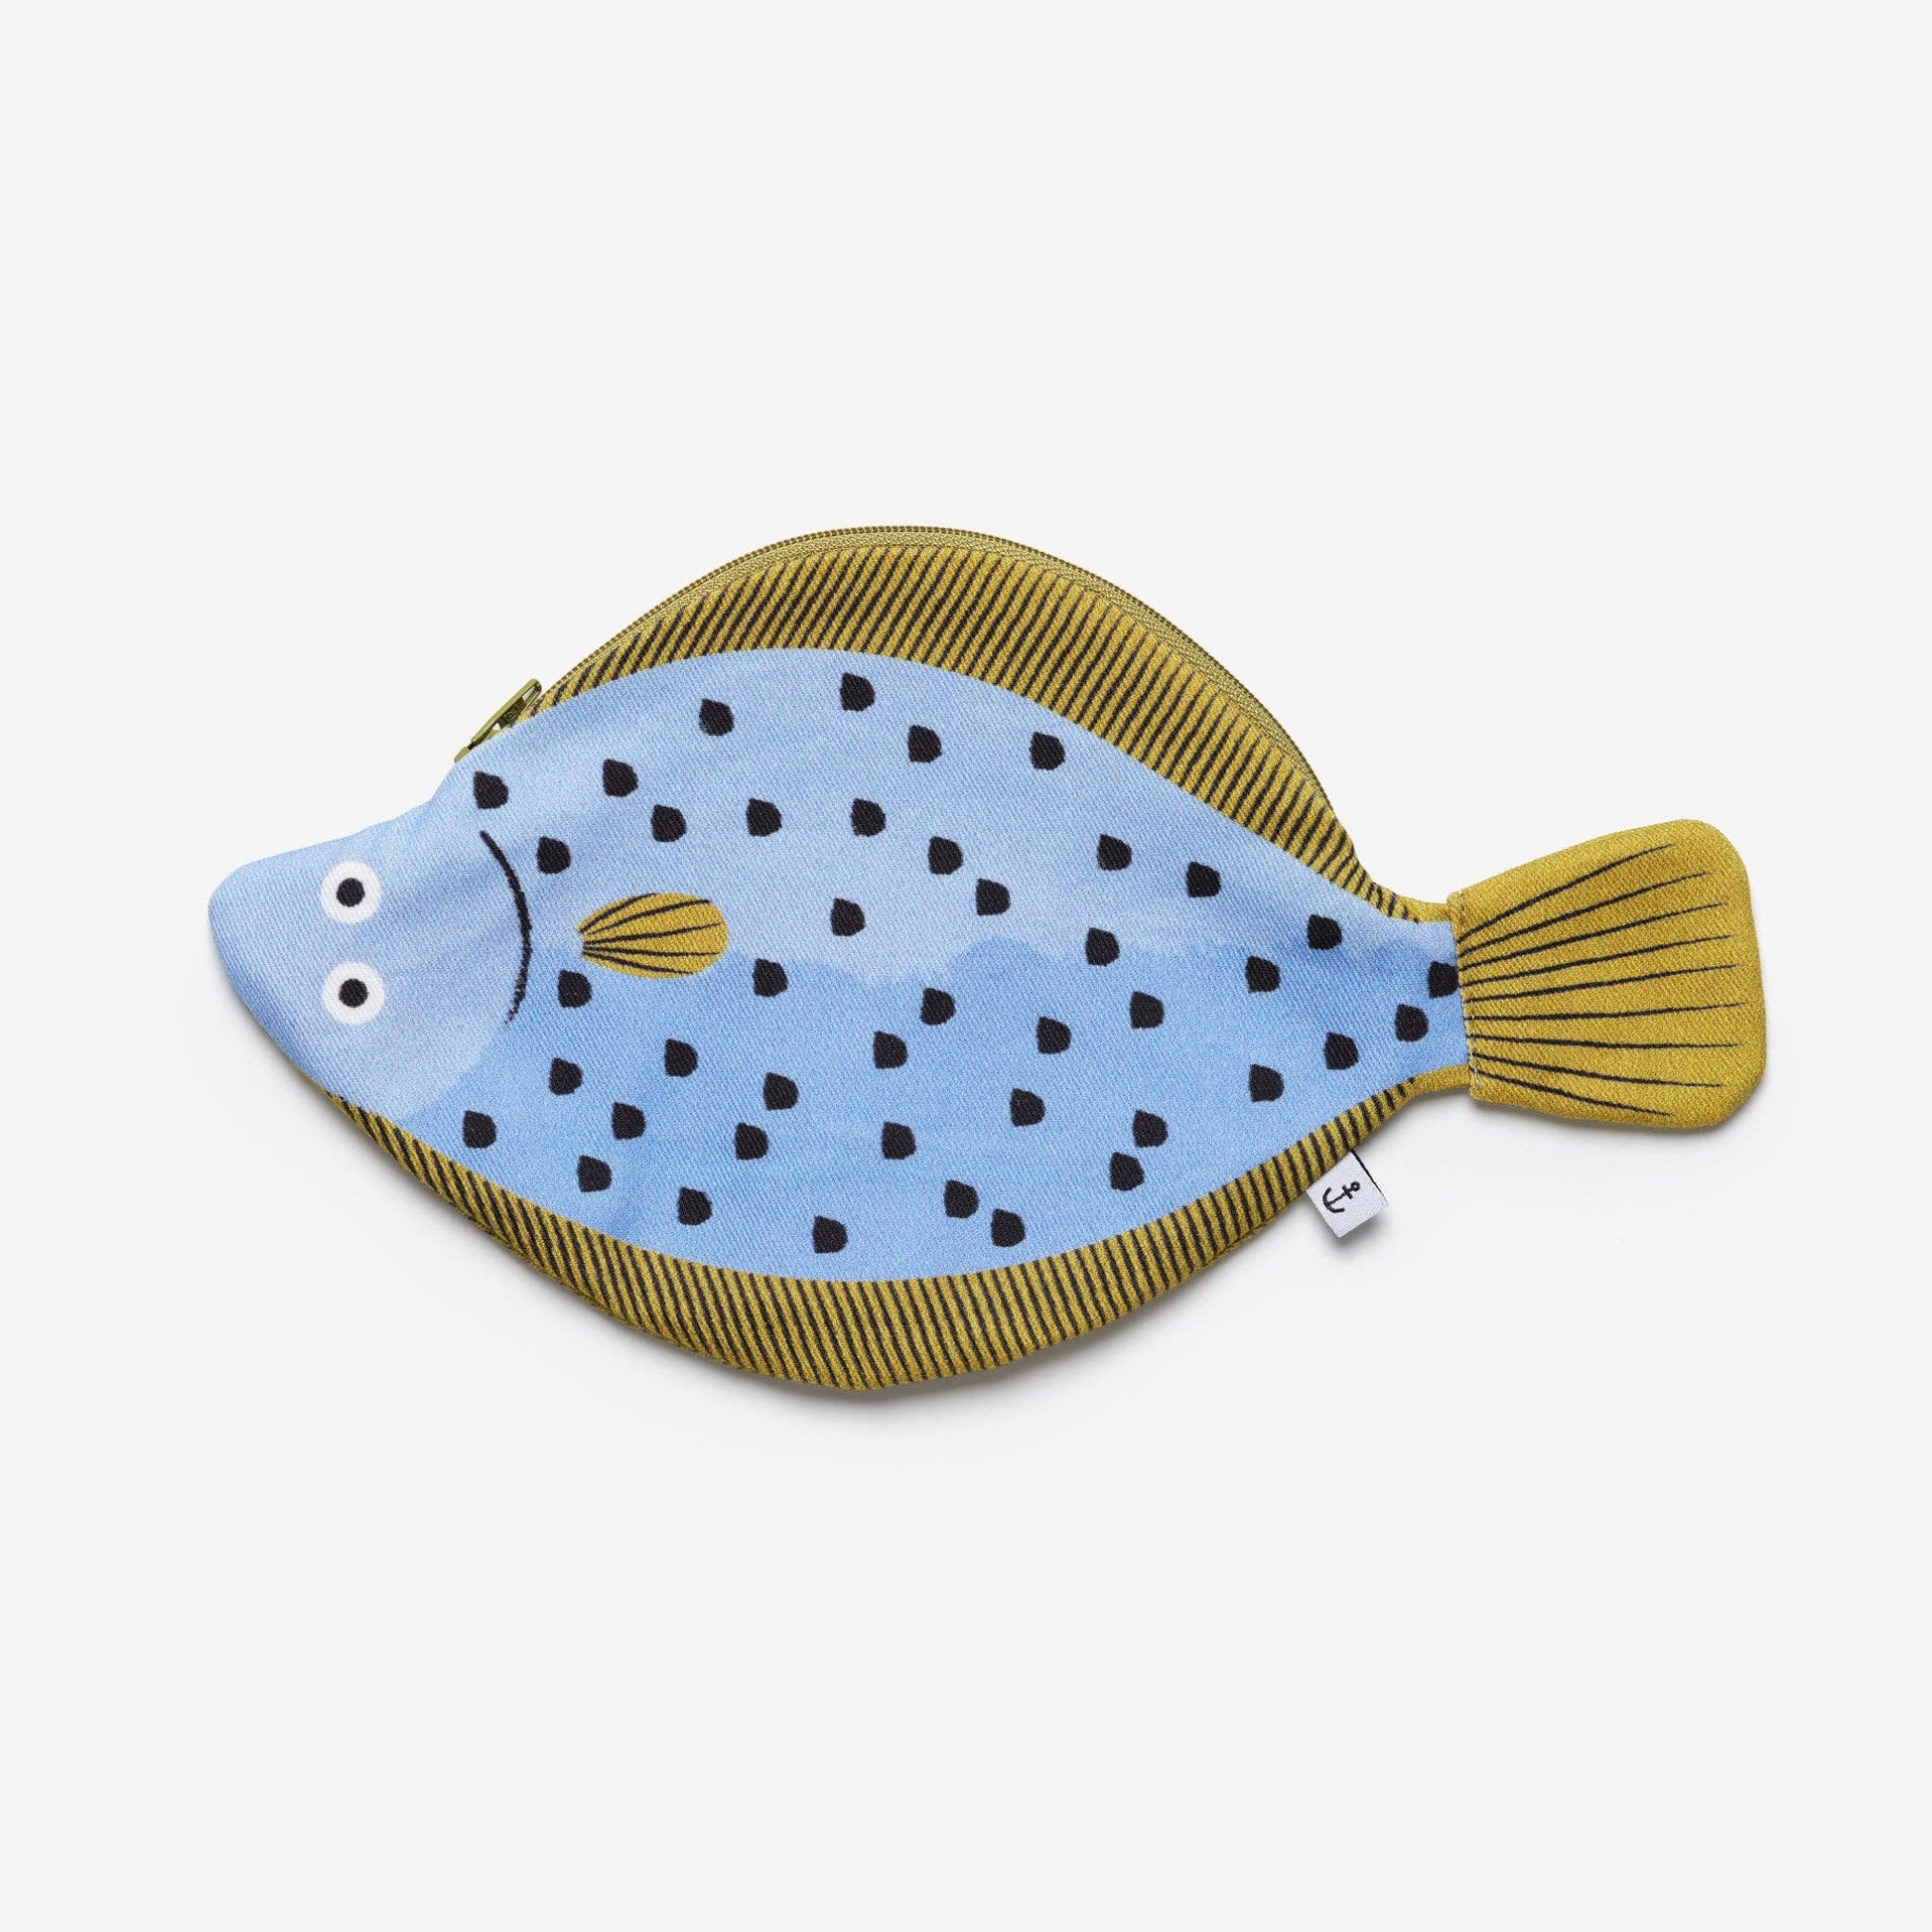 Flounder fish zippered pouch --- body is blue with black dots, fins are yellow 